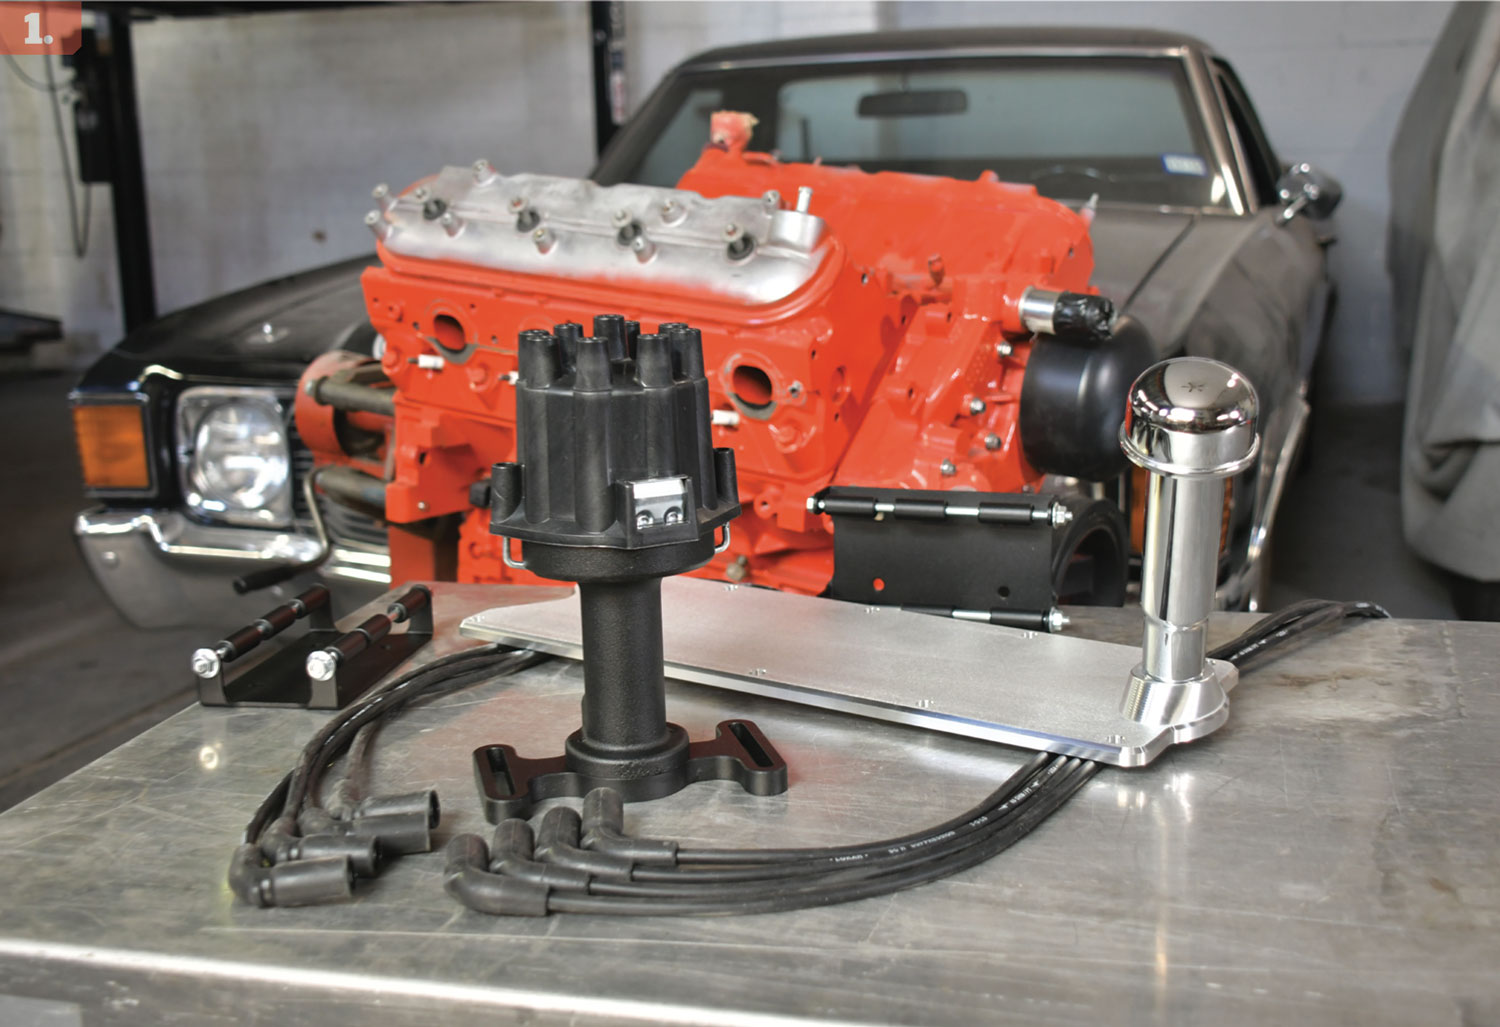 LS engine and accompanying parts for motoring